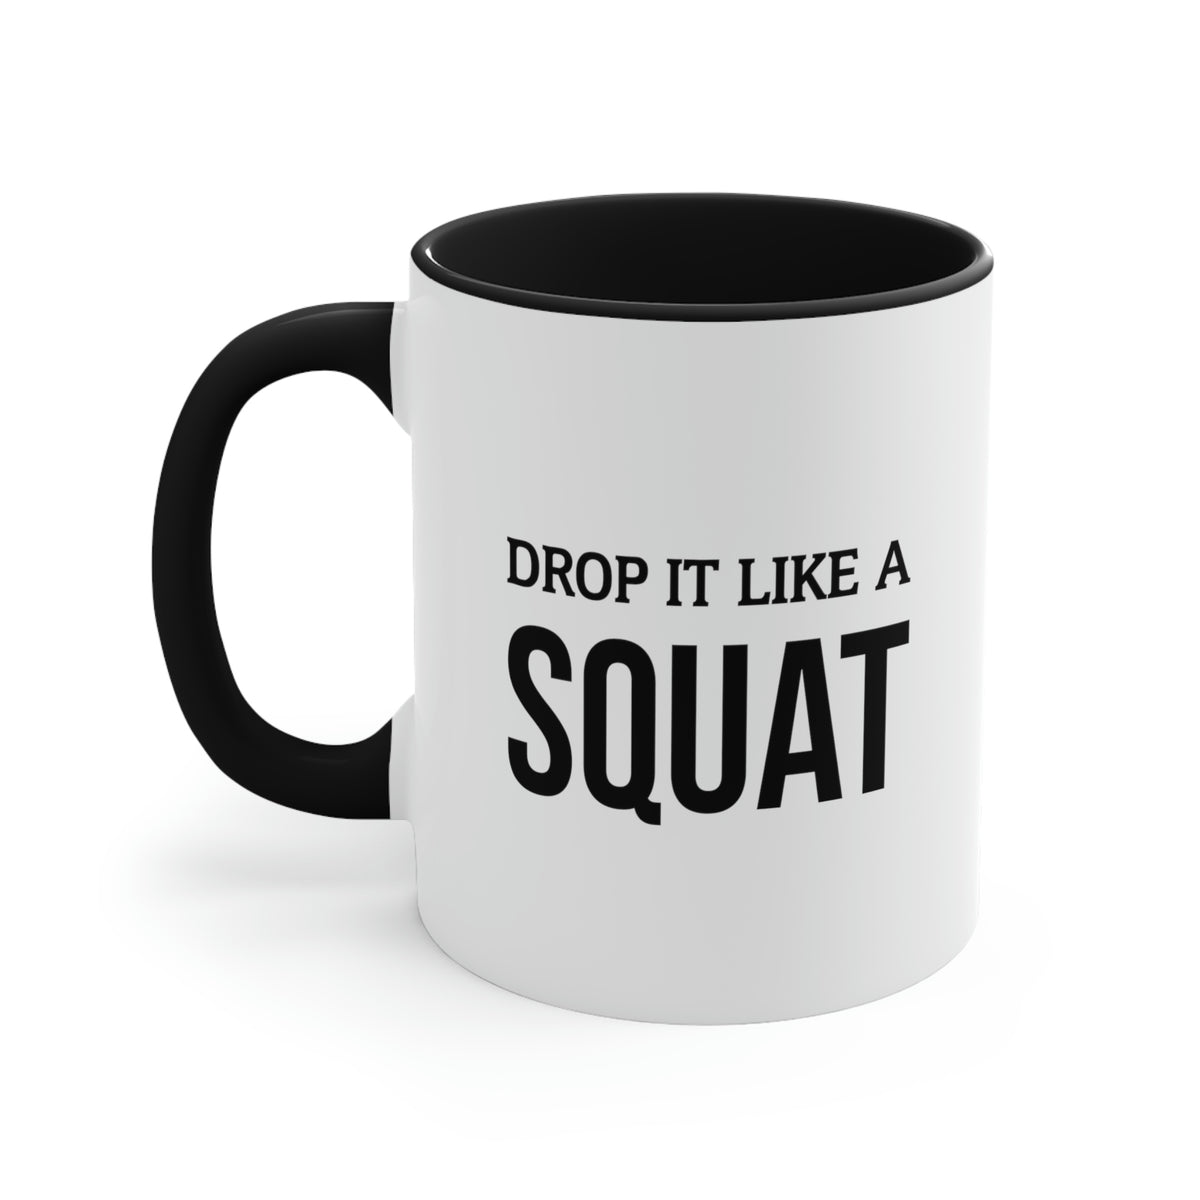 Personal Trainer Gifts - Drop It Like A Squat Two Tone Coffee Mug - Gifts For Athletic Trainer Fitness Trainer Men Women